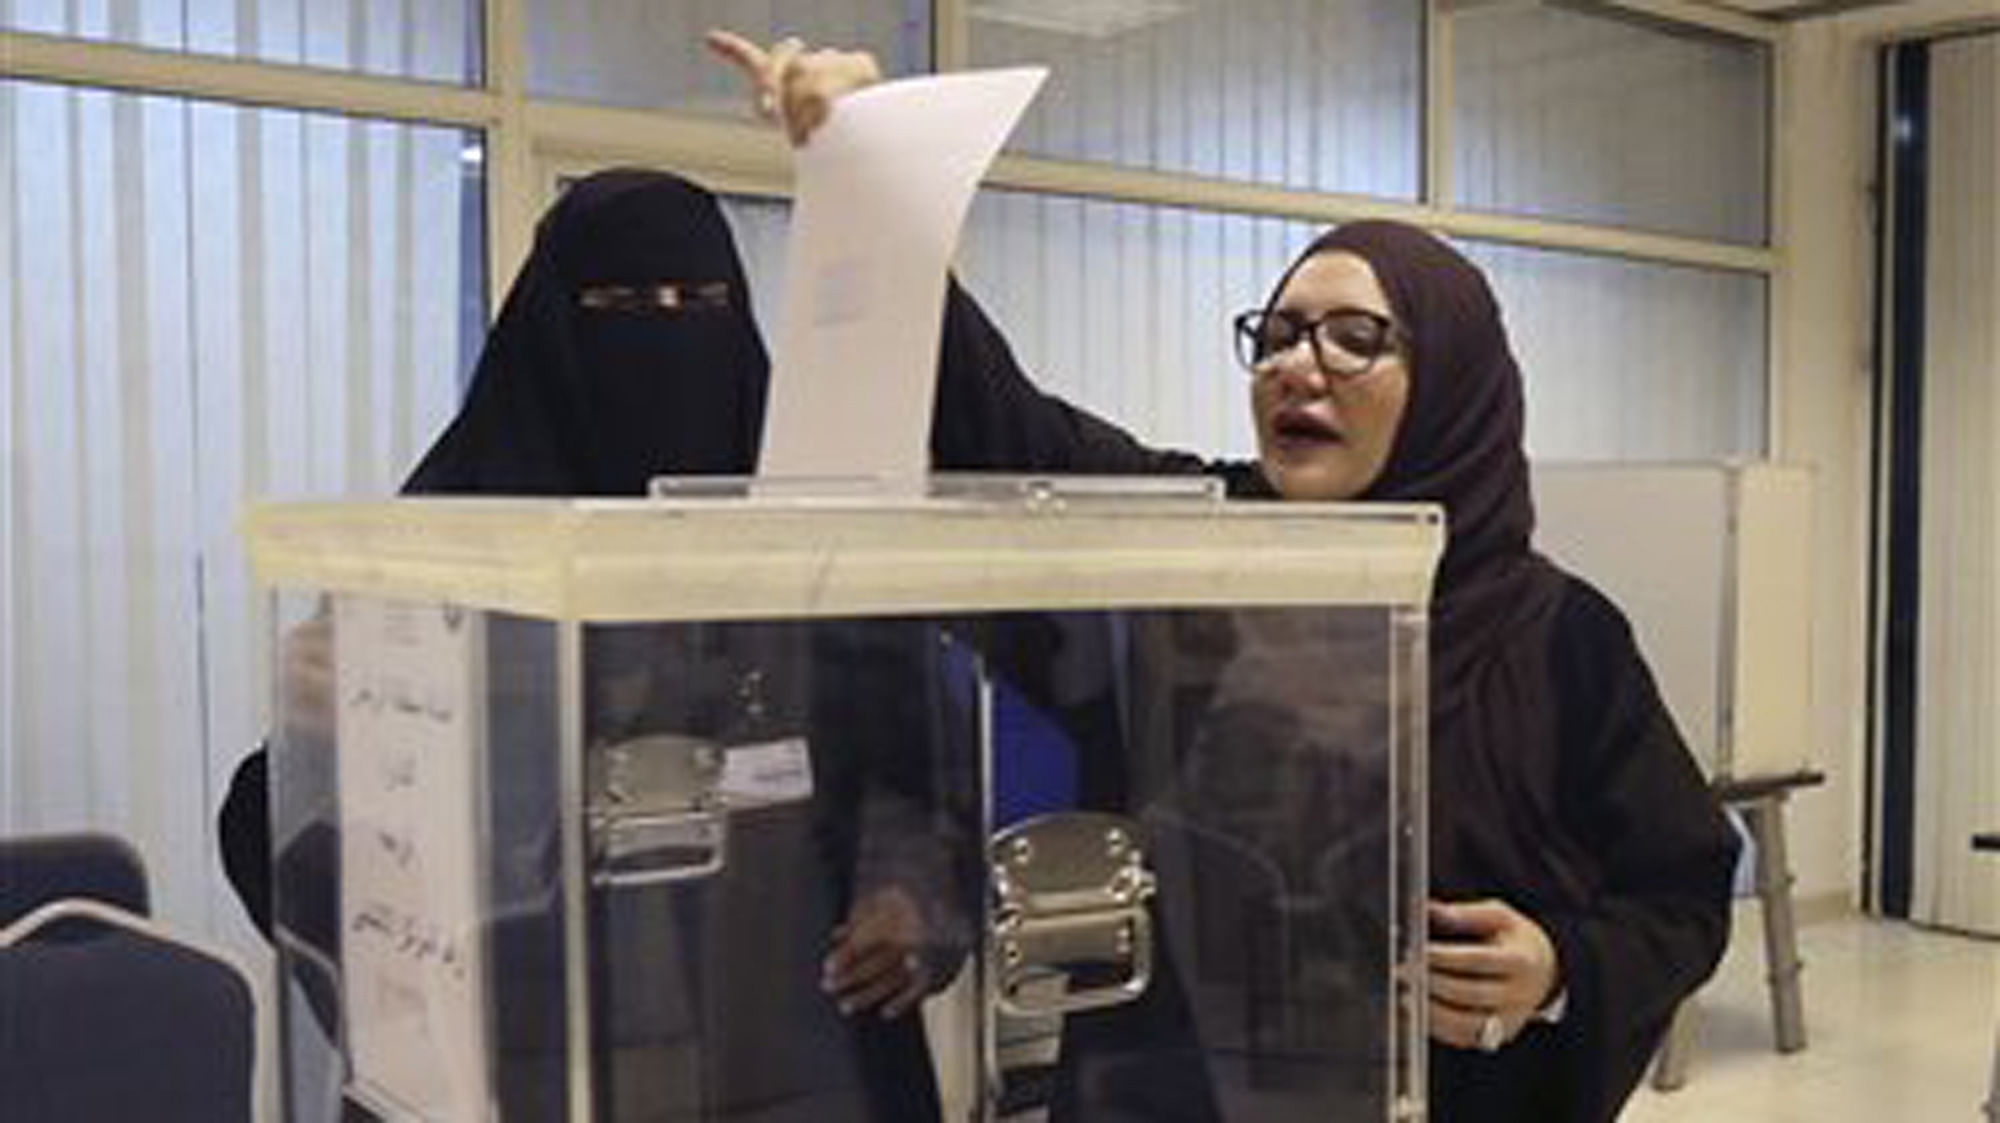 

Saudi women vote at a polling centre during the country’s municipal elections. (Photo: AP)